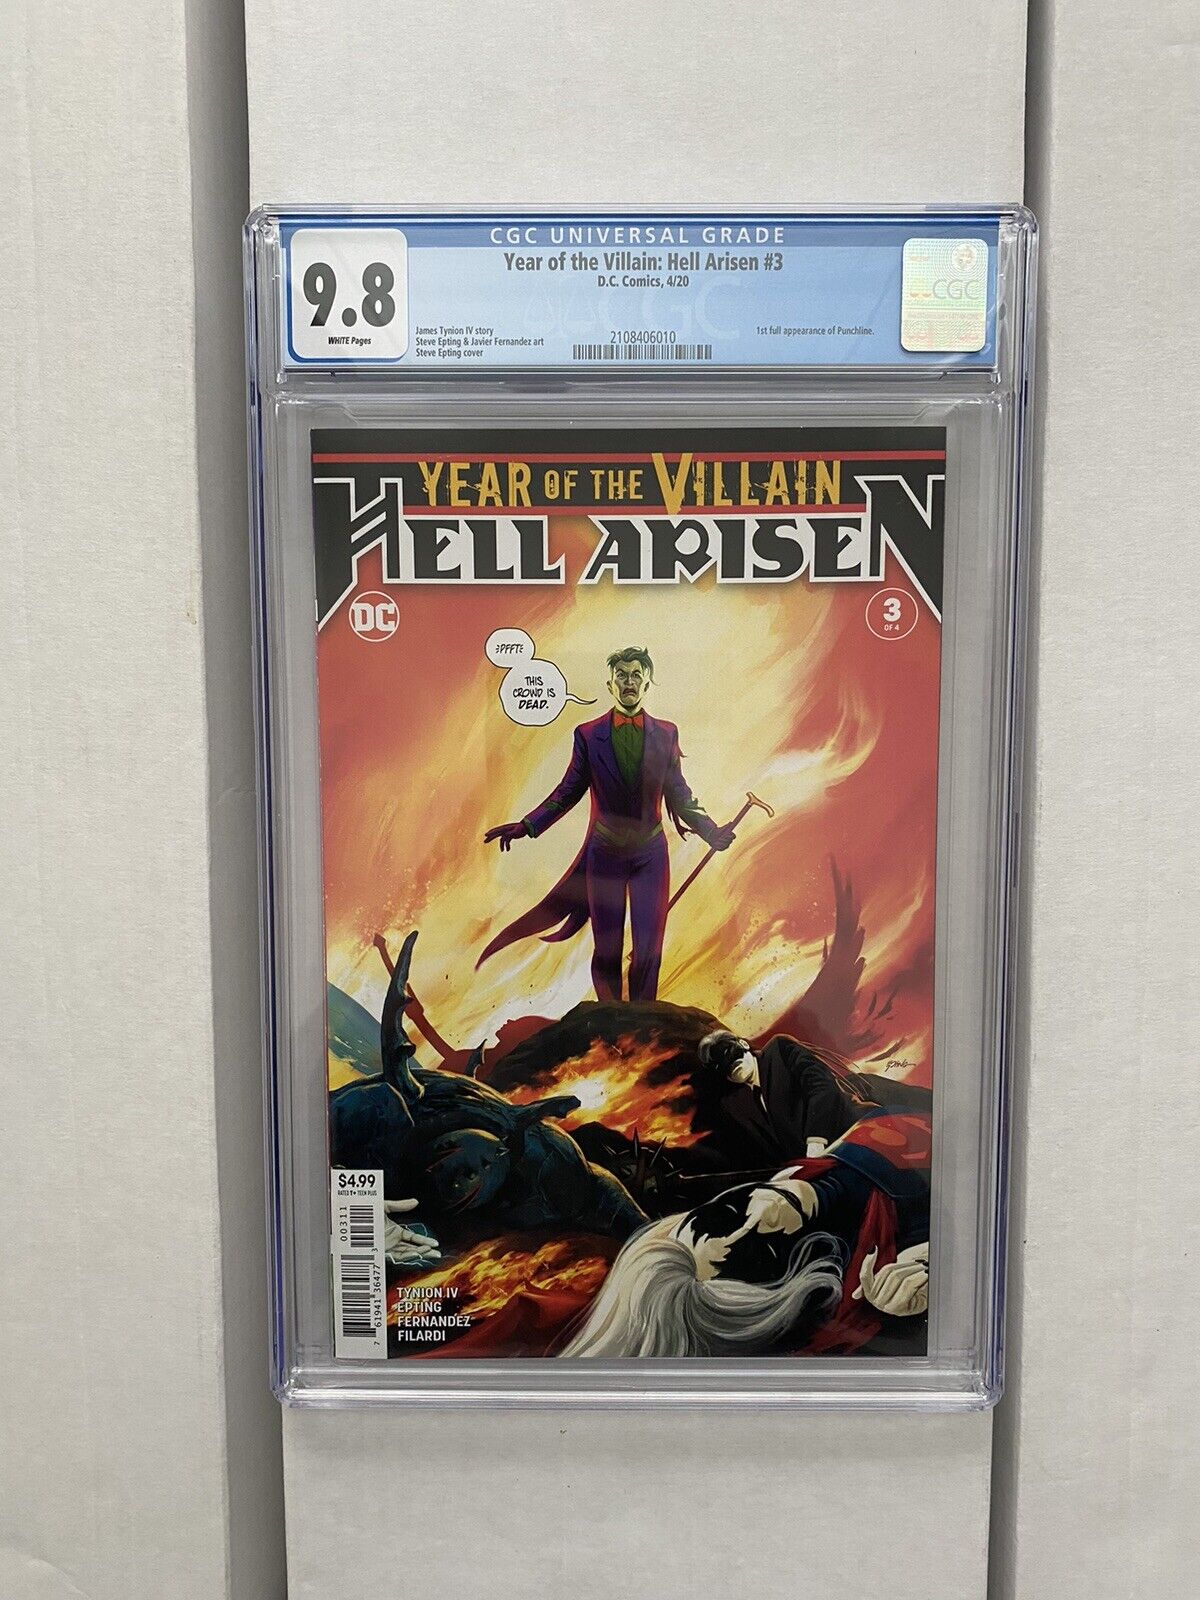 Year of the Villain Hell Arisen #3 CGC 9.8 1st Full Appearance Of Punchline